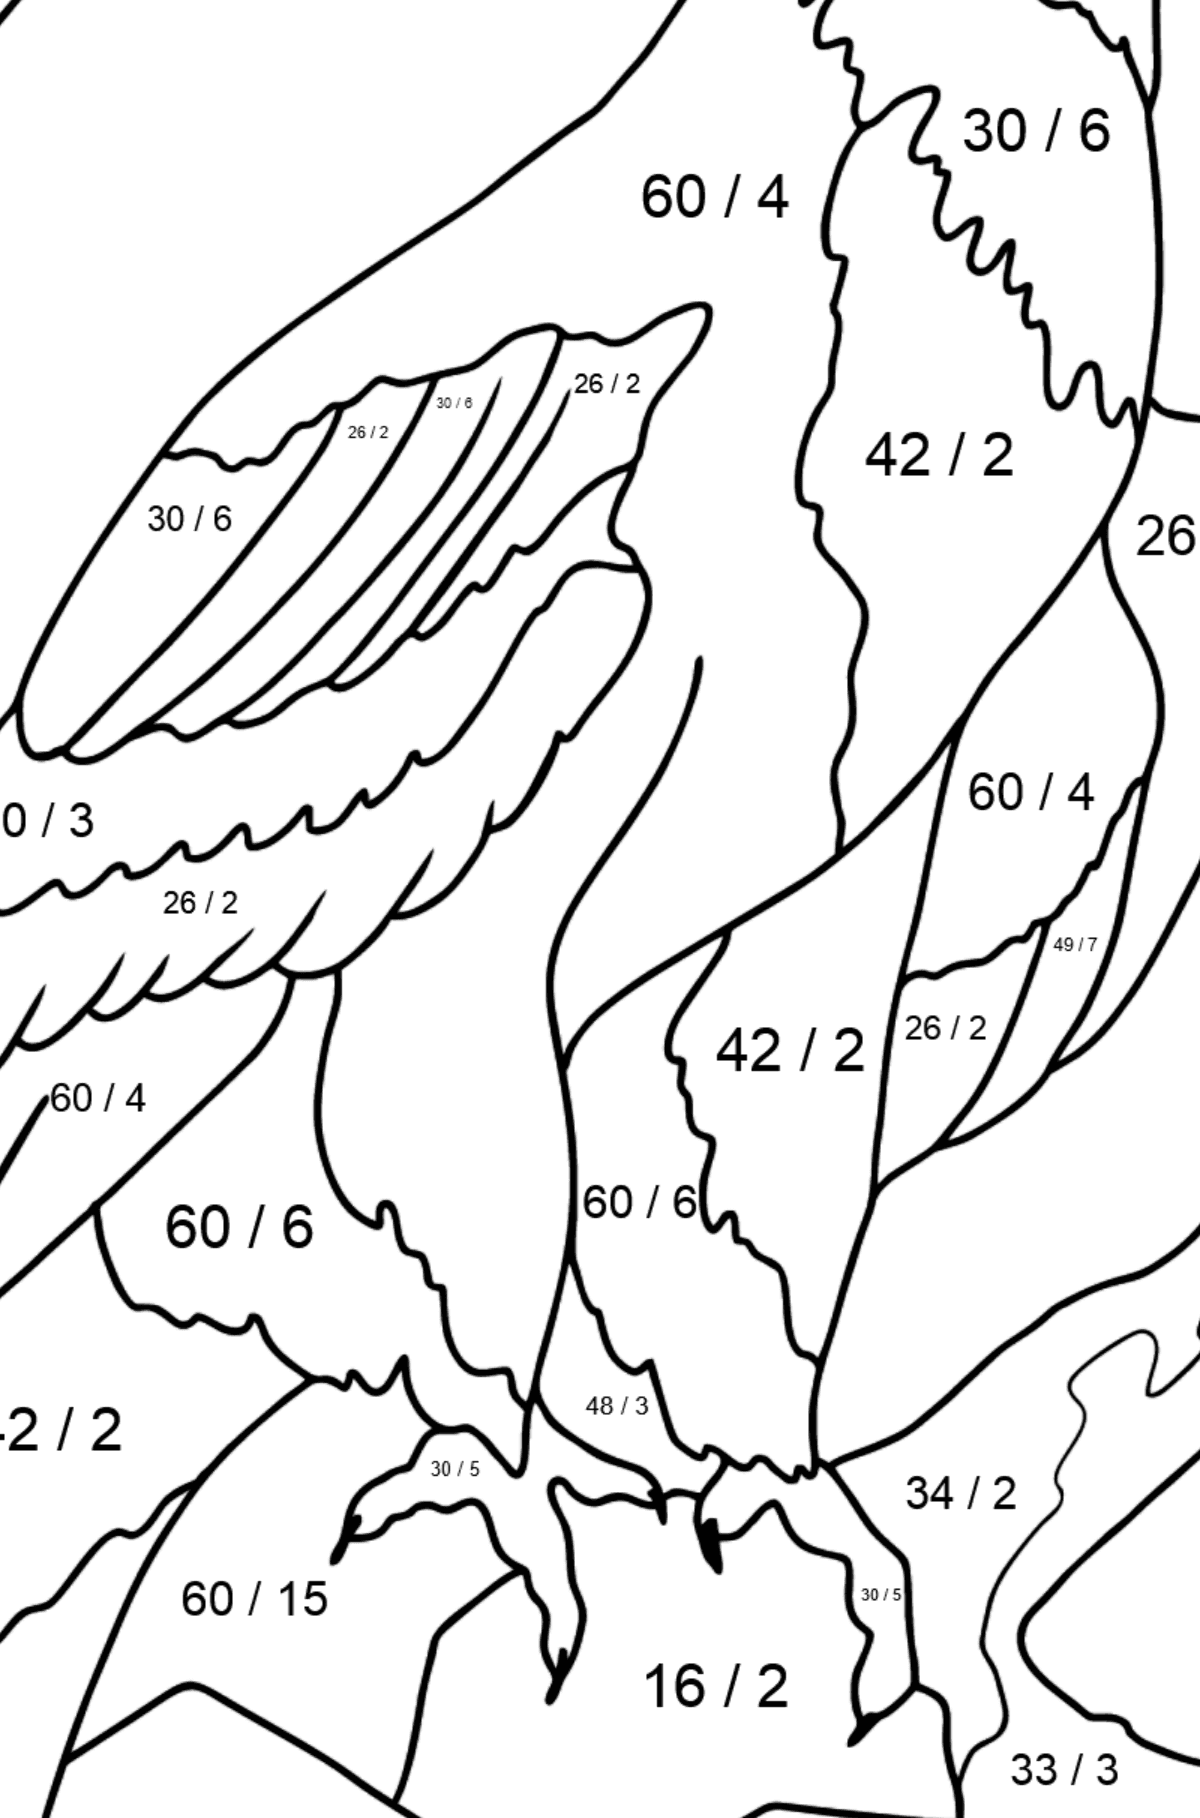 Coloring Page - An Eagle is Looking for Prey - Math Coloring - Division for Kids